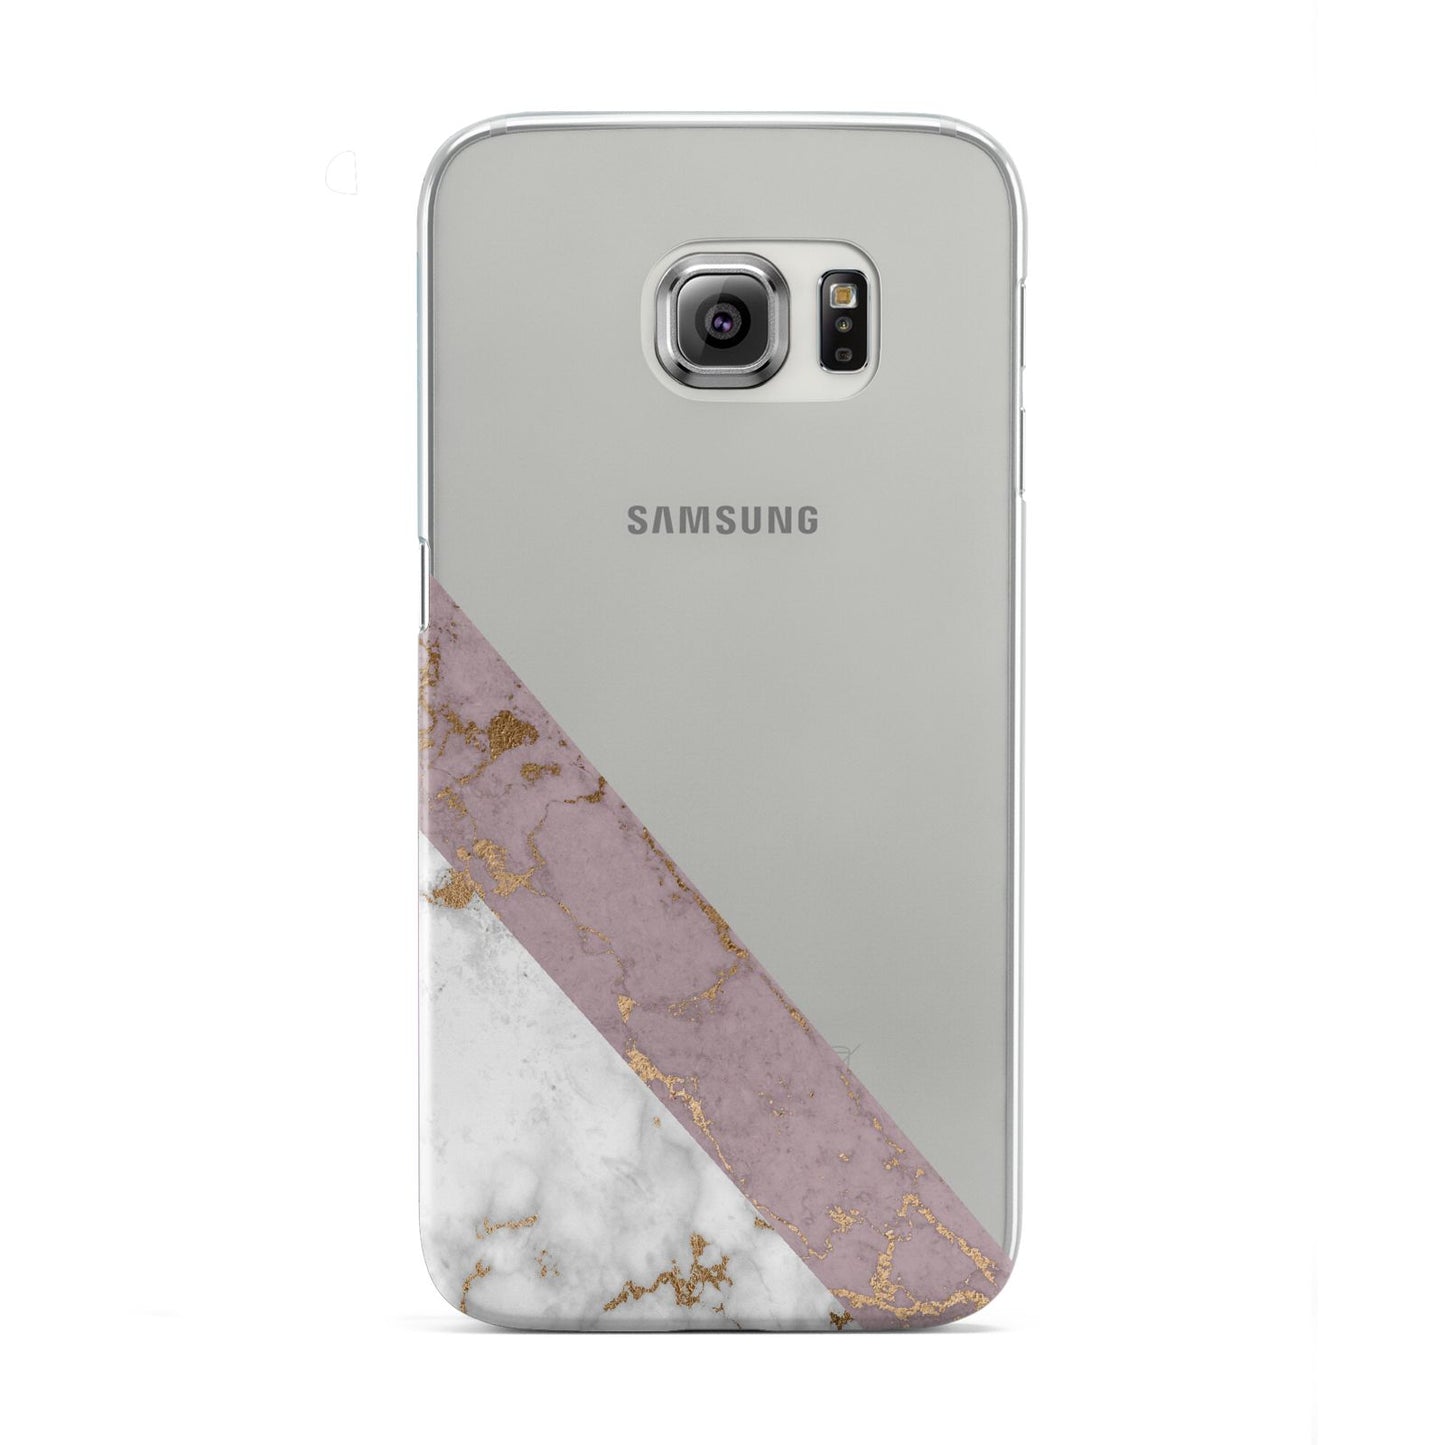 Transparent Pink and White Marble Samsung Galaxy S6 Edge Case